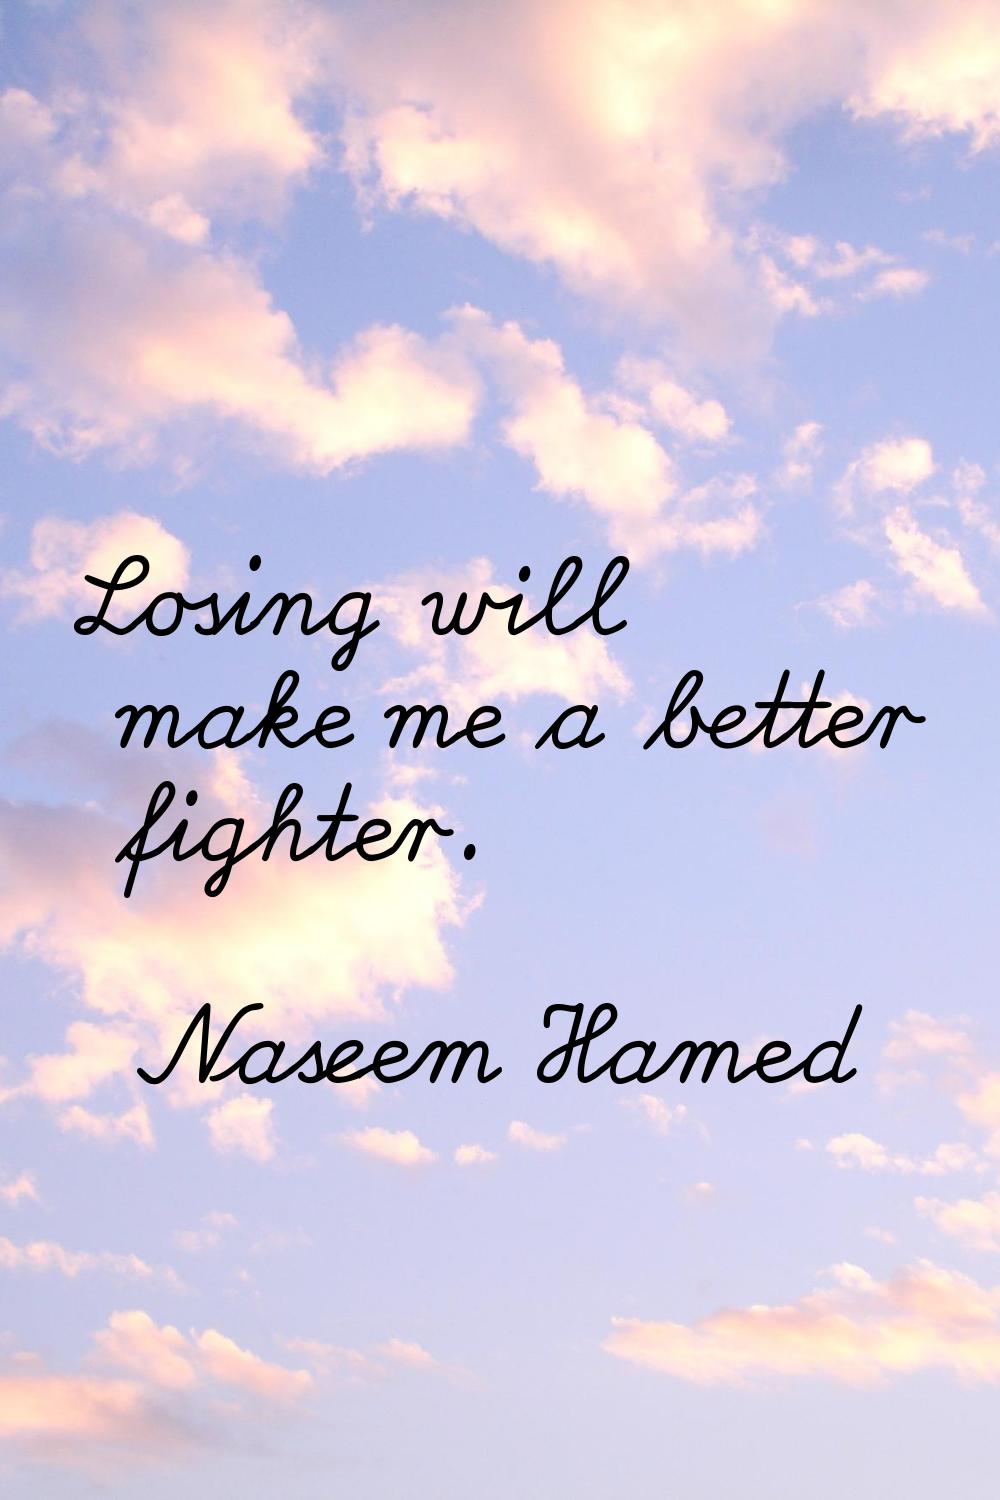 Losing will make me a better fighter.